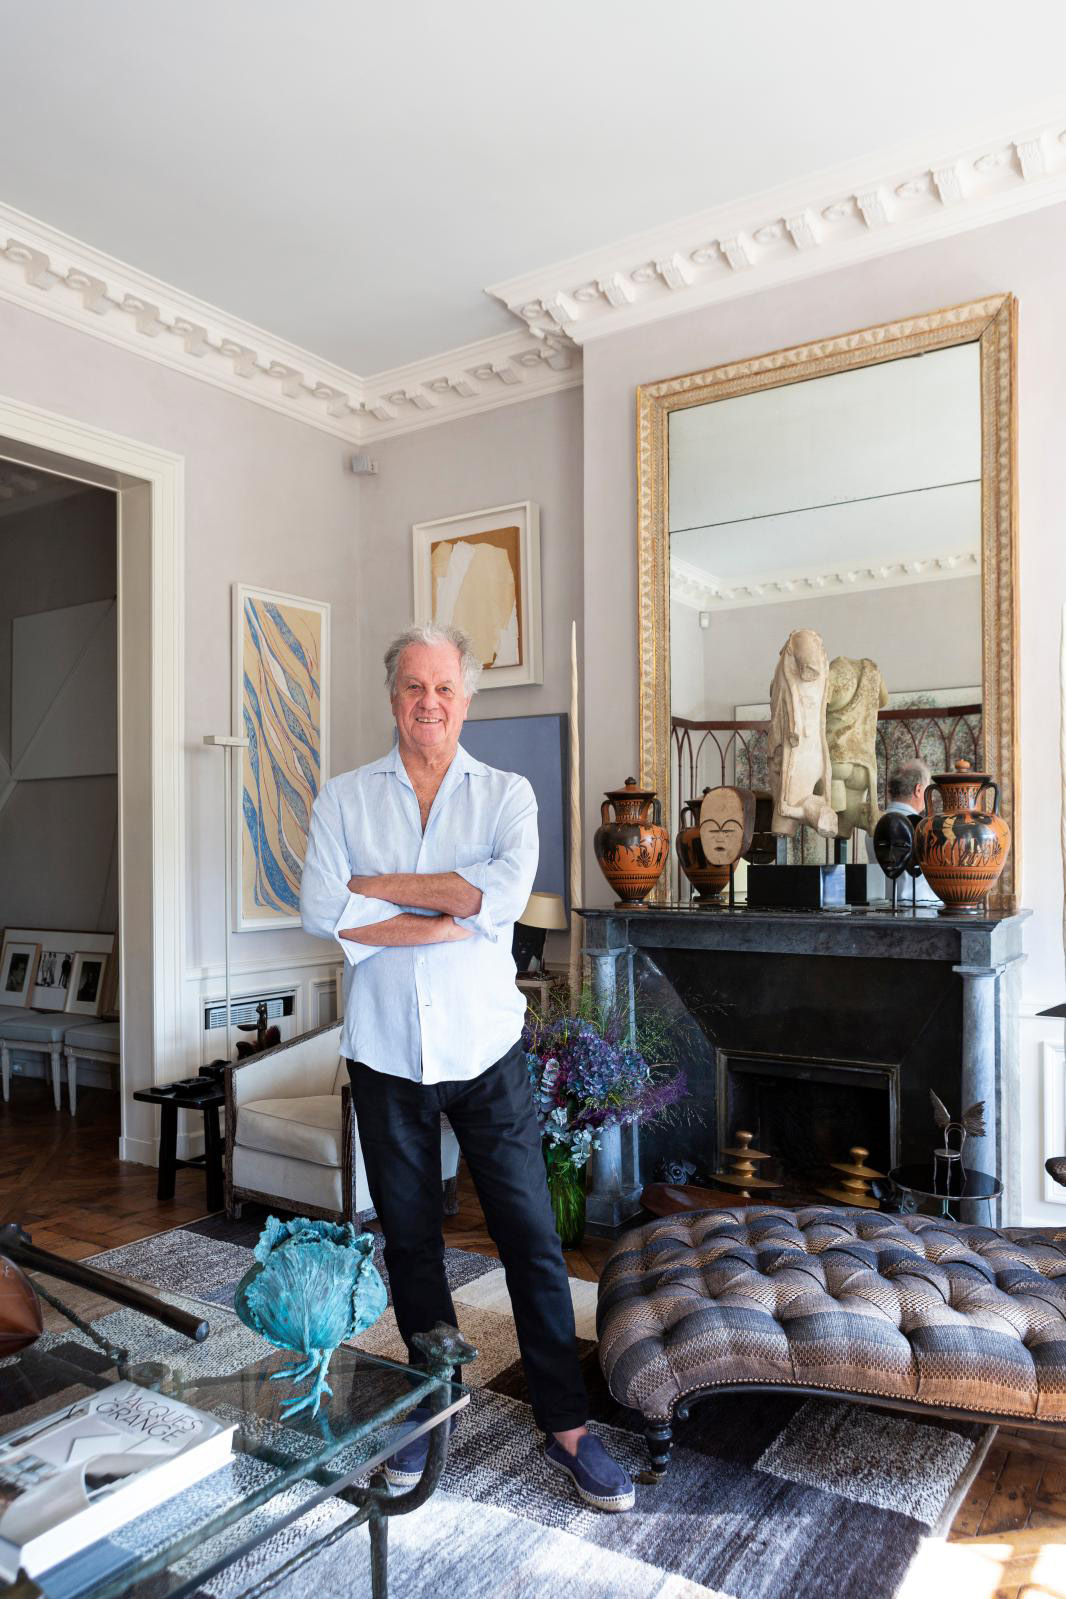 Jacques Grange: The Expert Eye of One of the Greatest French Interior Designers